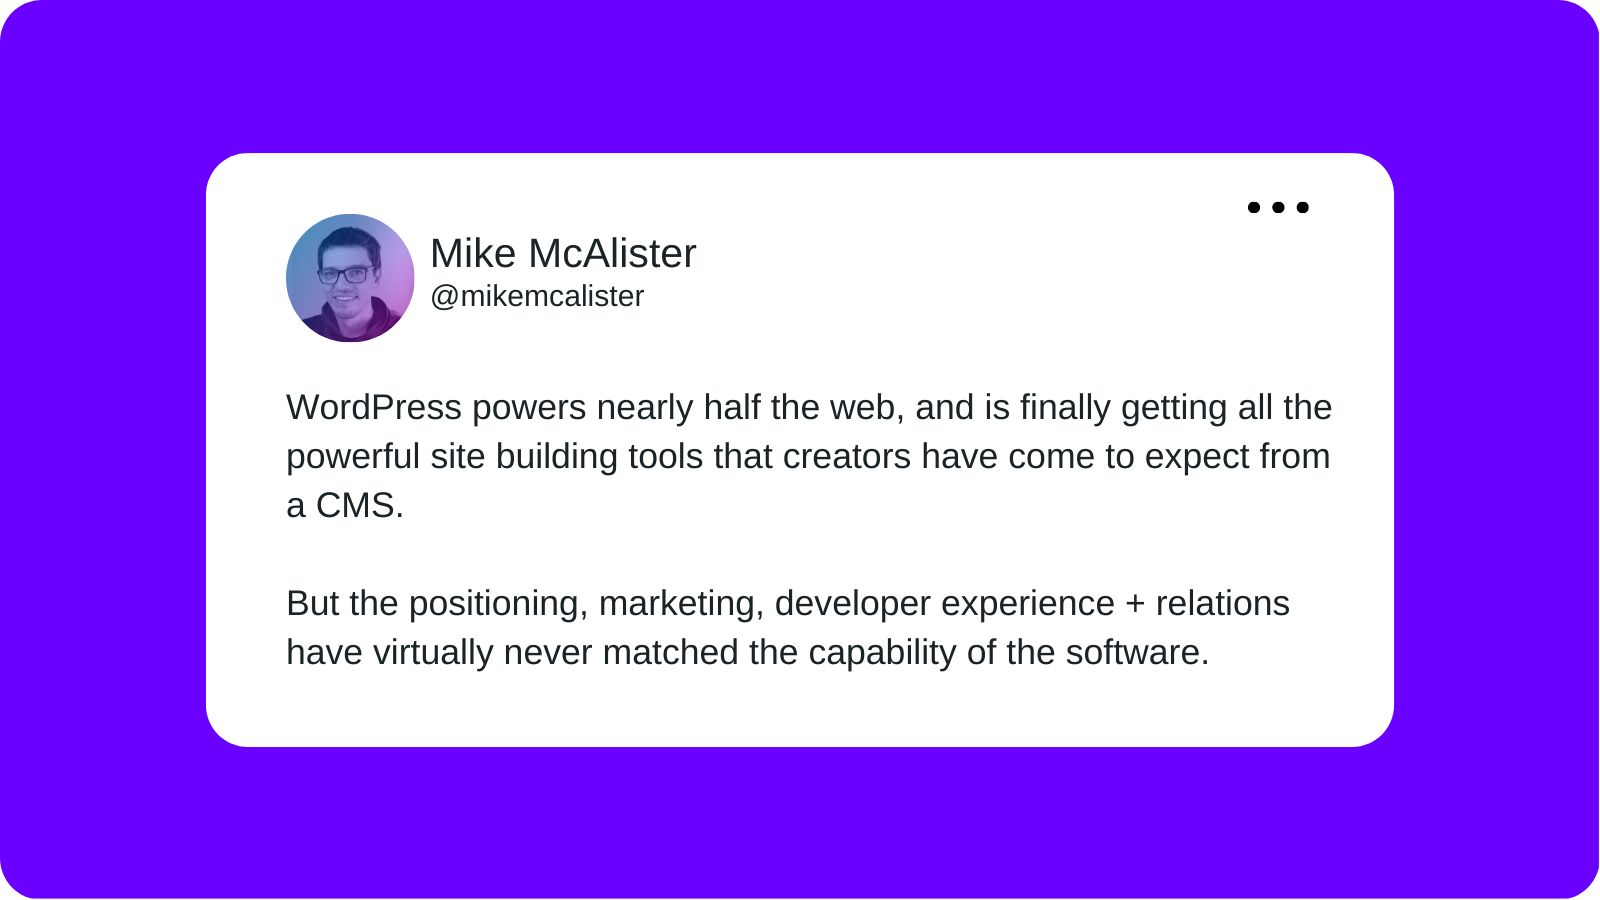 A tweet from Mike McAlister layered over a purple background that reads "WordPress powers nearly half the web, and is finally getting all the powerful site building tools that creators have come to expect from a CMS. But the positioning, marketing, developer experience and relations have virtually never matched the capability of the software."